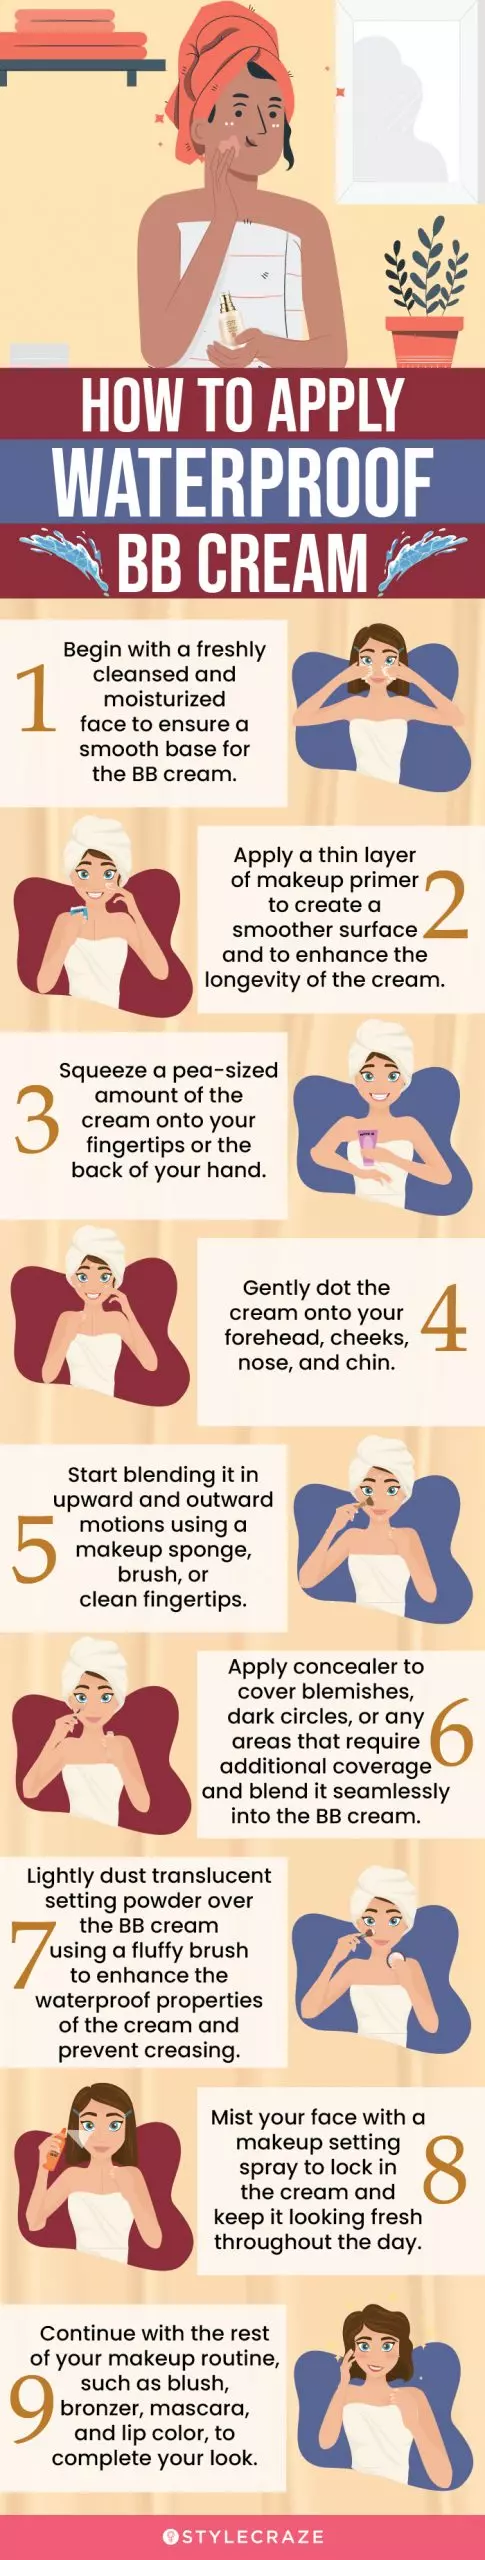 How To Apply Waterproof BB Cream (infographic)